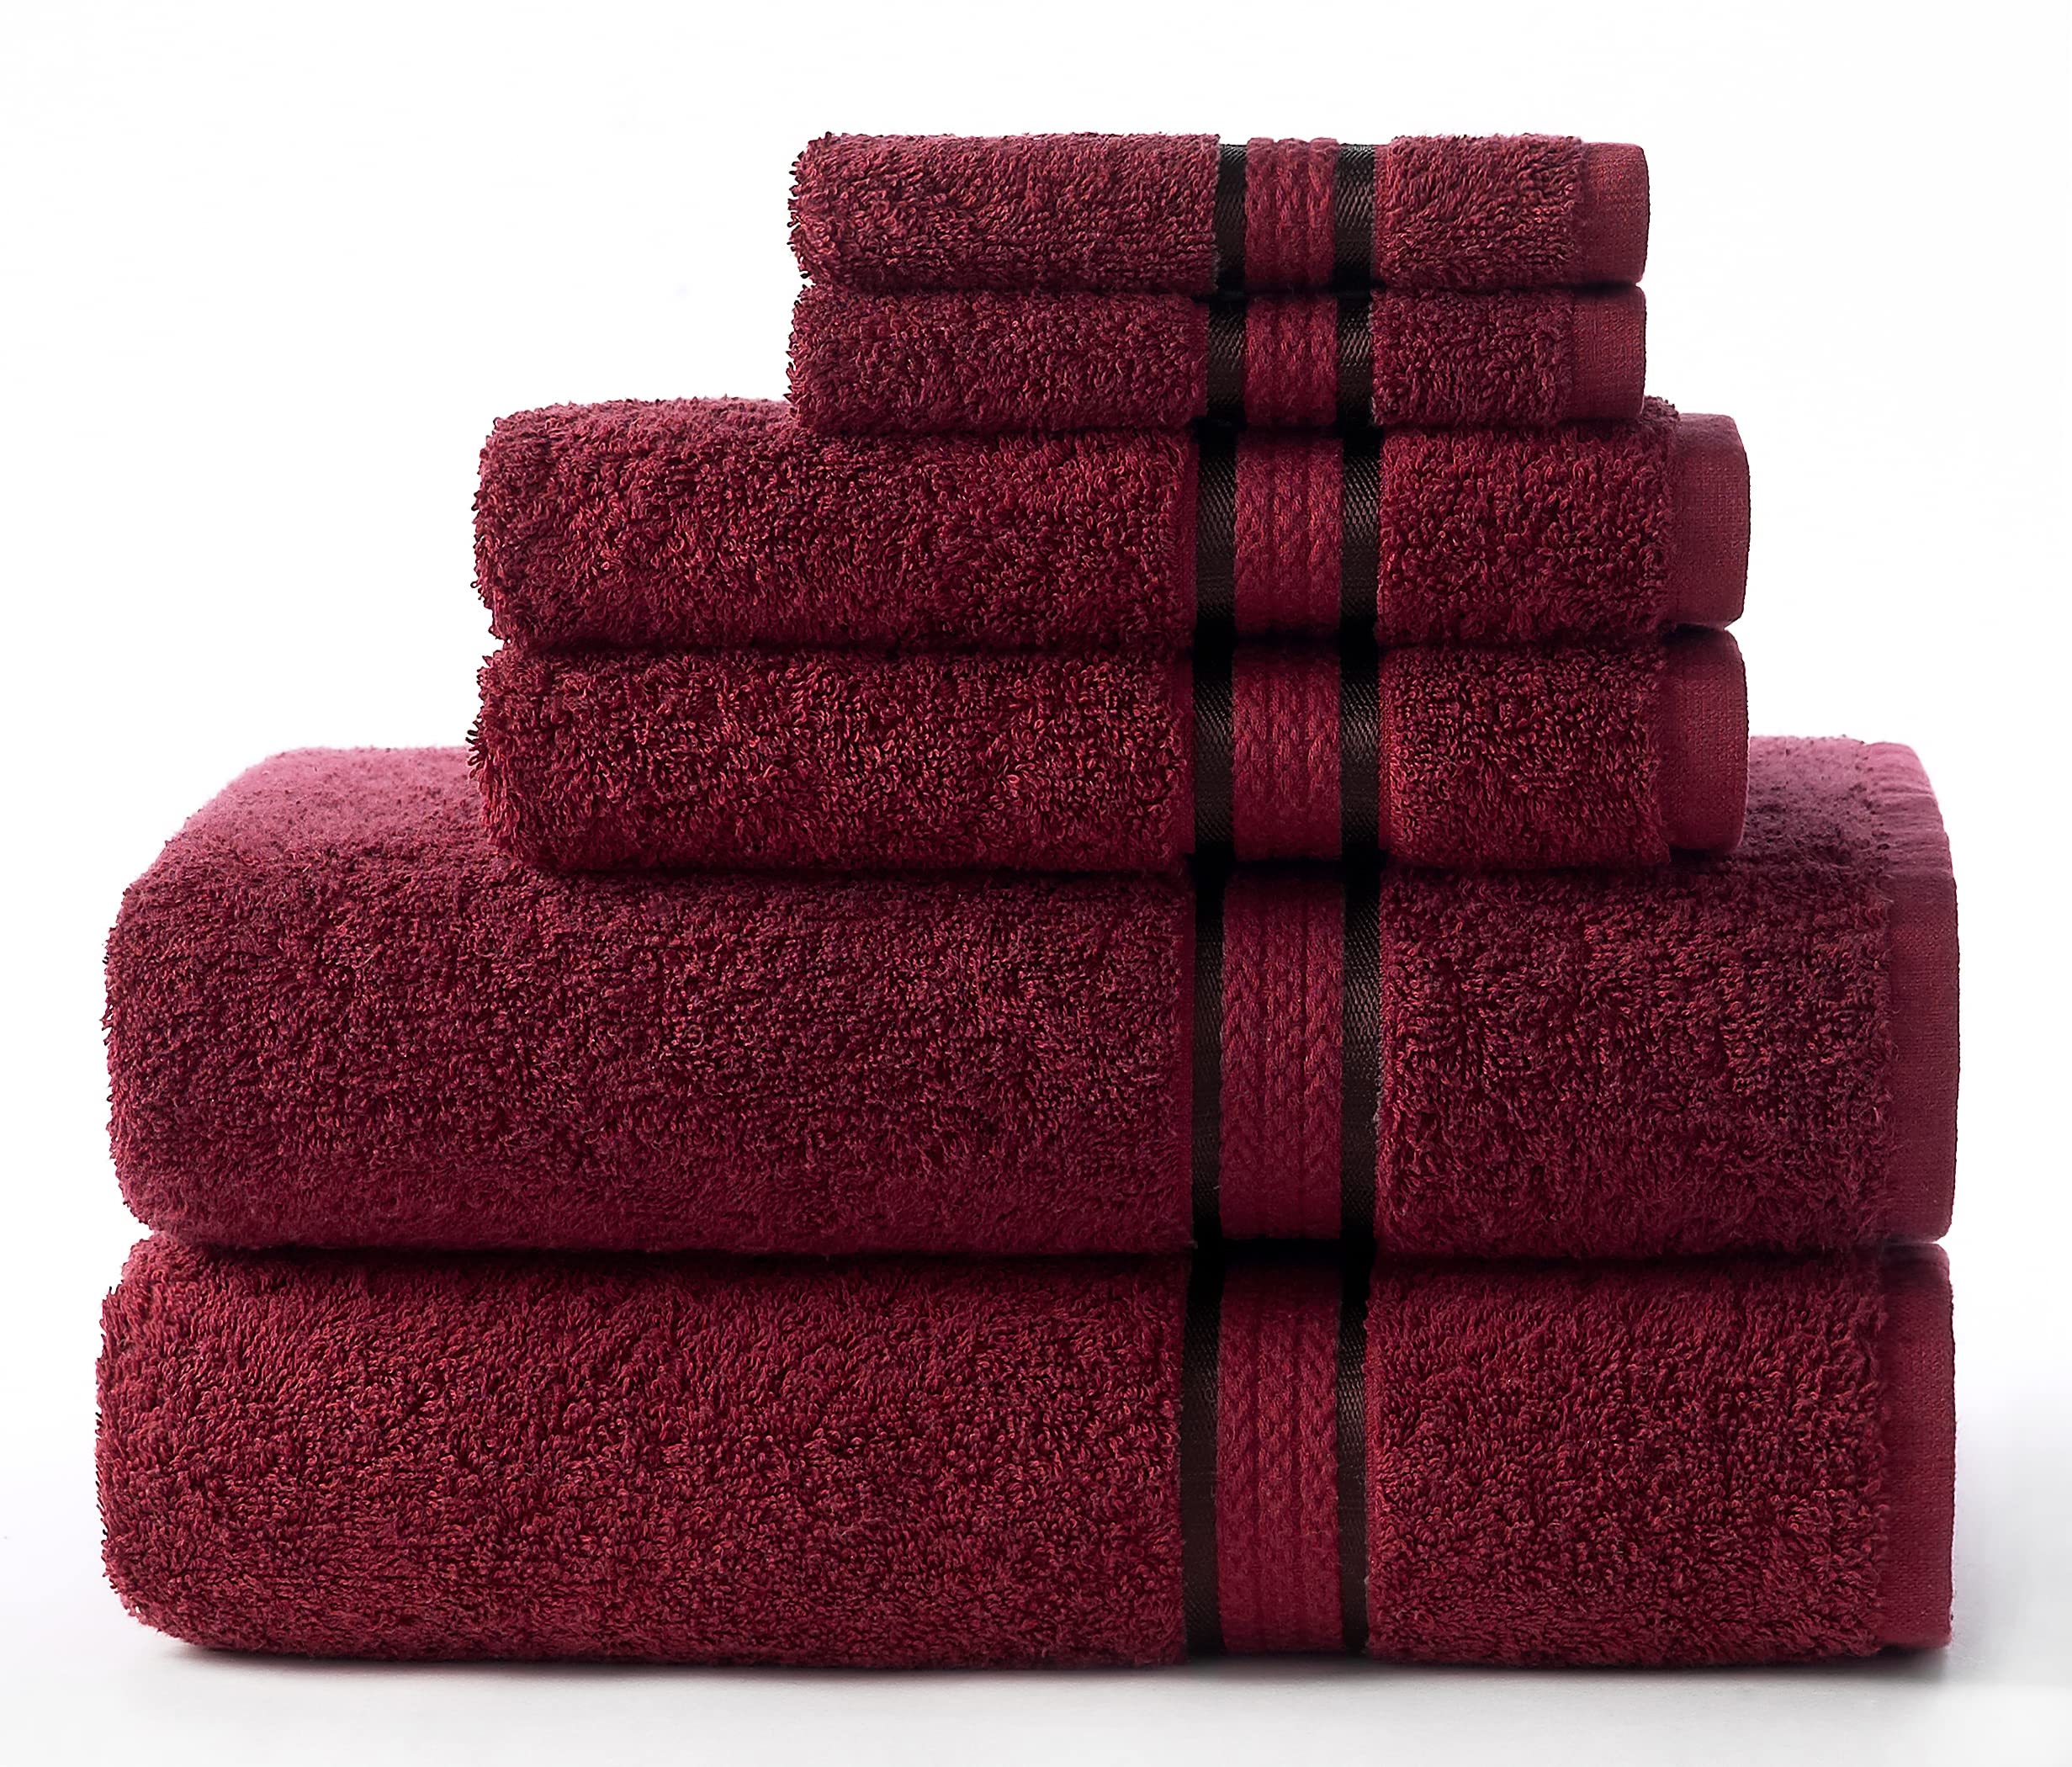 Book Cover COTTON CRAFT Ultra Soft 6 Piece Towel Set - 2 Oversized Large Bath Towels,2 Hand Towels,2 Washcloths - Absorbent Quick Dry Everyday Luxury Hotel Bathroom Spa Gym Shower Pool - 100% Cotton - Burgundy 6 Piece Towel Set Burgundy